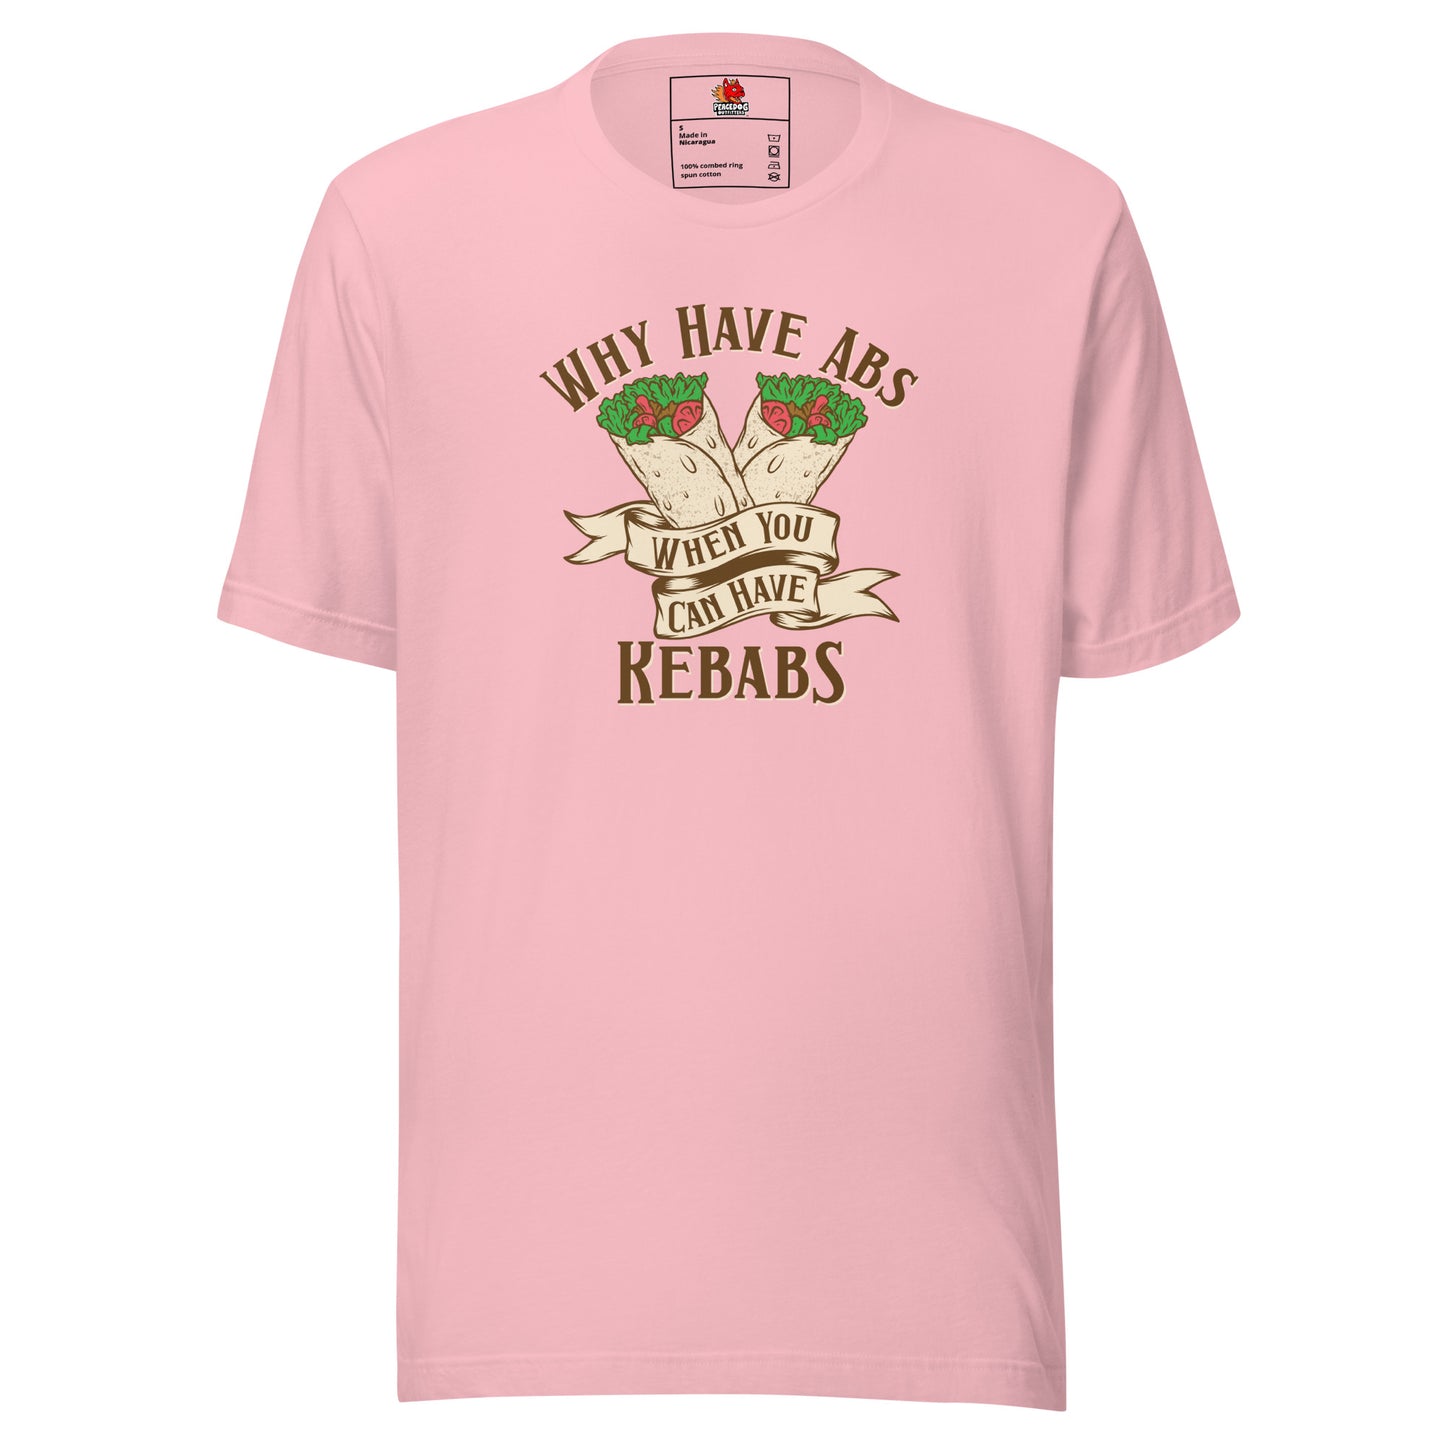 Why Have Abs When You Can Have Kebabs T-shirt